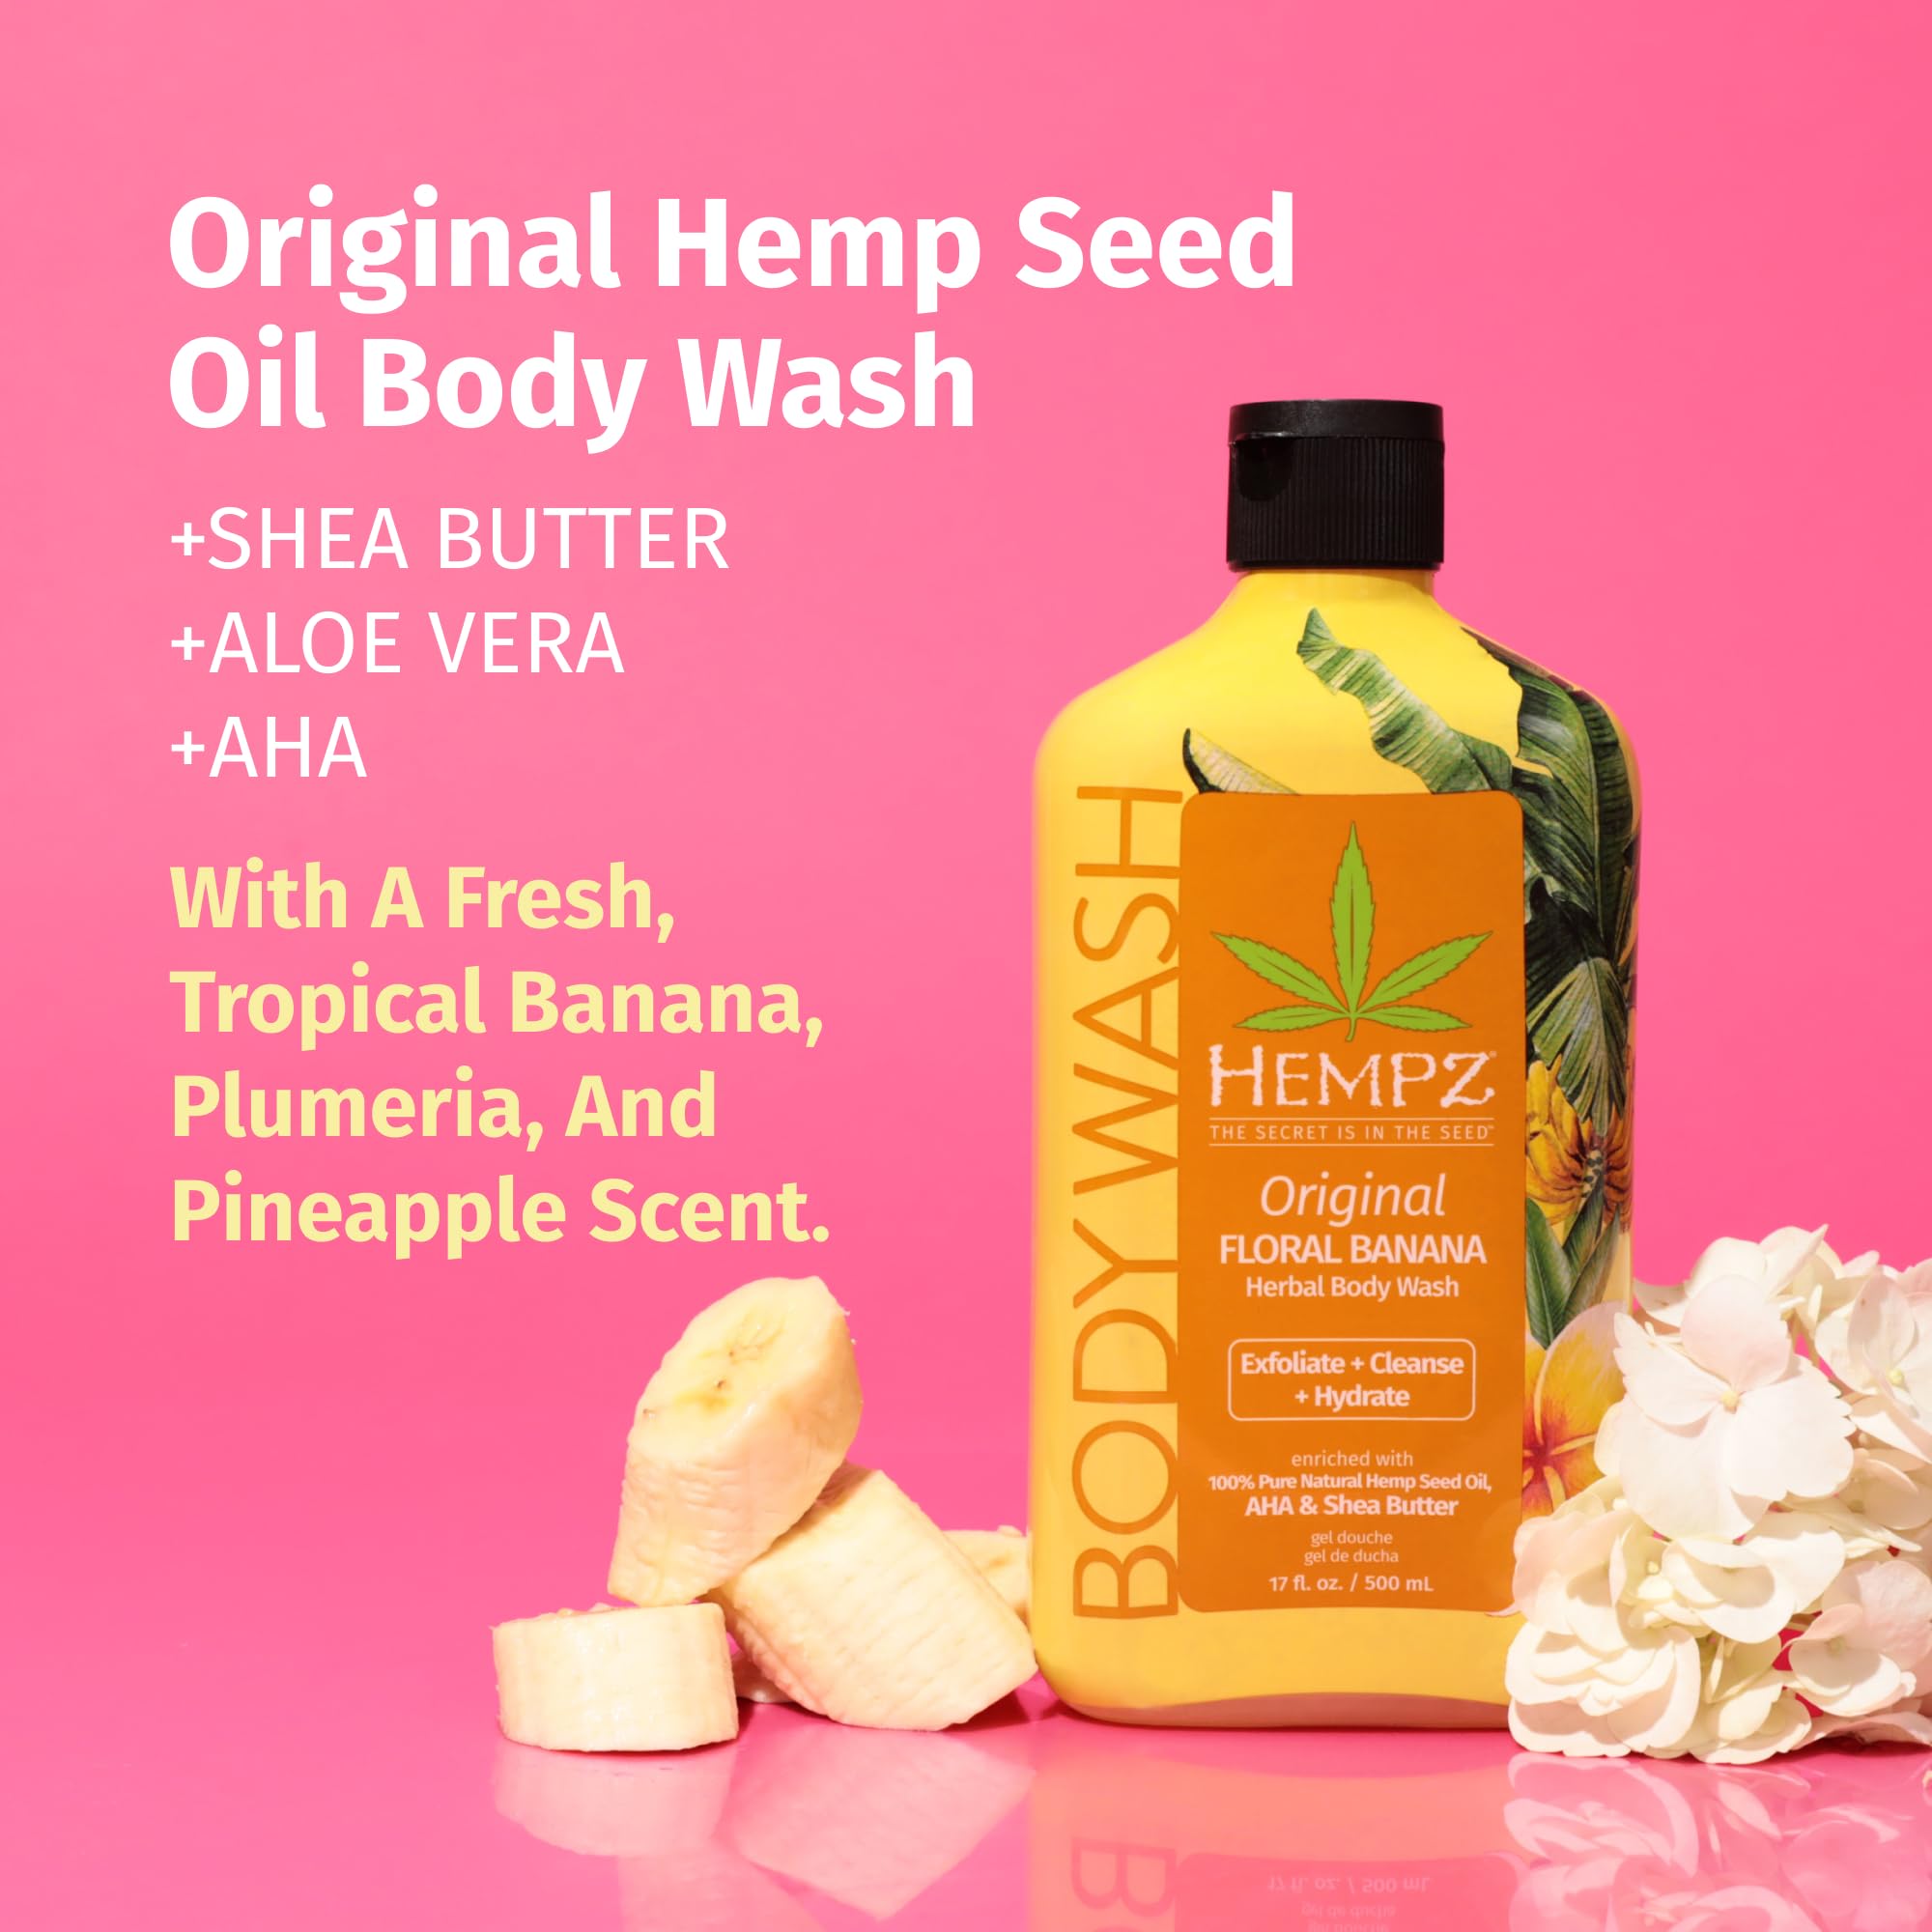 Hempz Body Wash - Original Floral & Banana - Hydrating for Sensitive Skin, Scented, Exfoliating with Shea Butter, Pure Hemp Seed Oil, and Algae for Sensitive Skin - 17 fl oz